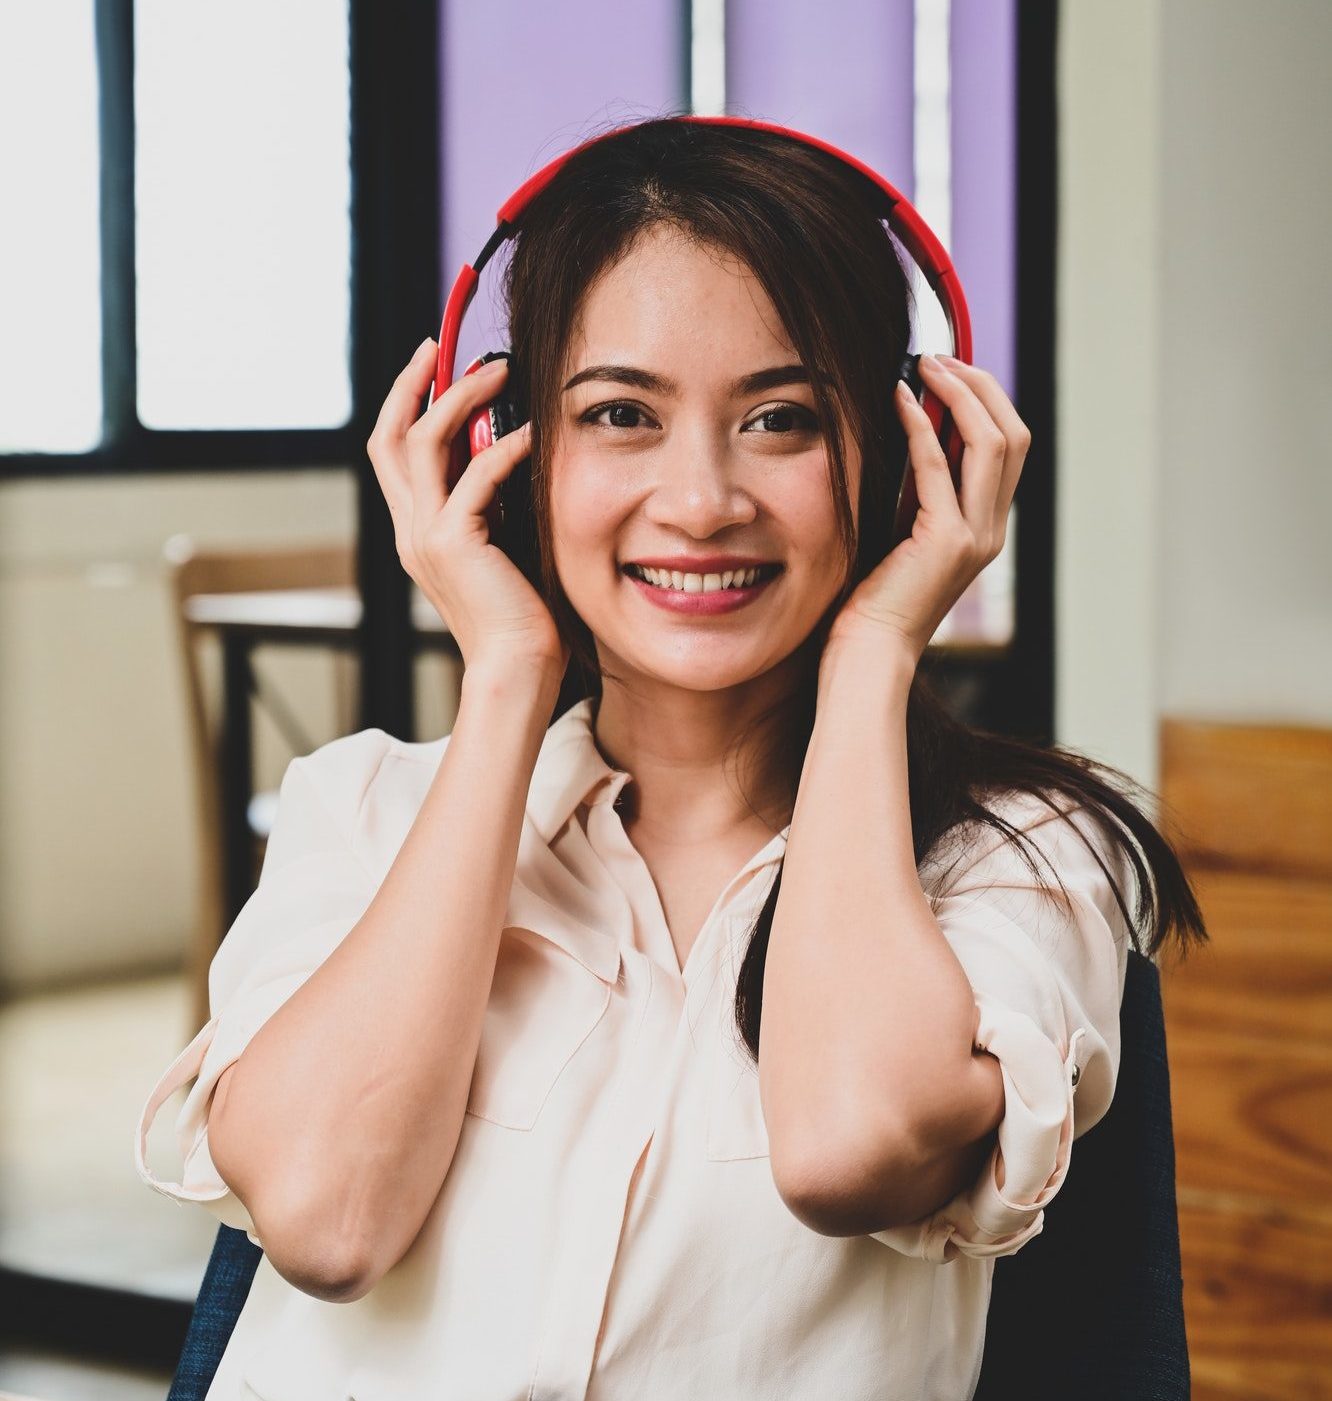 Portrait cheerful young woman listening music with headphones.